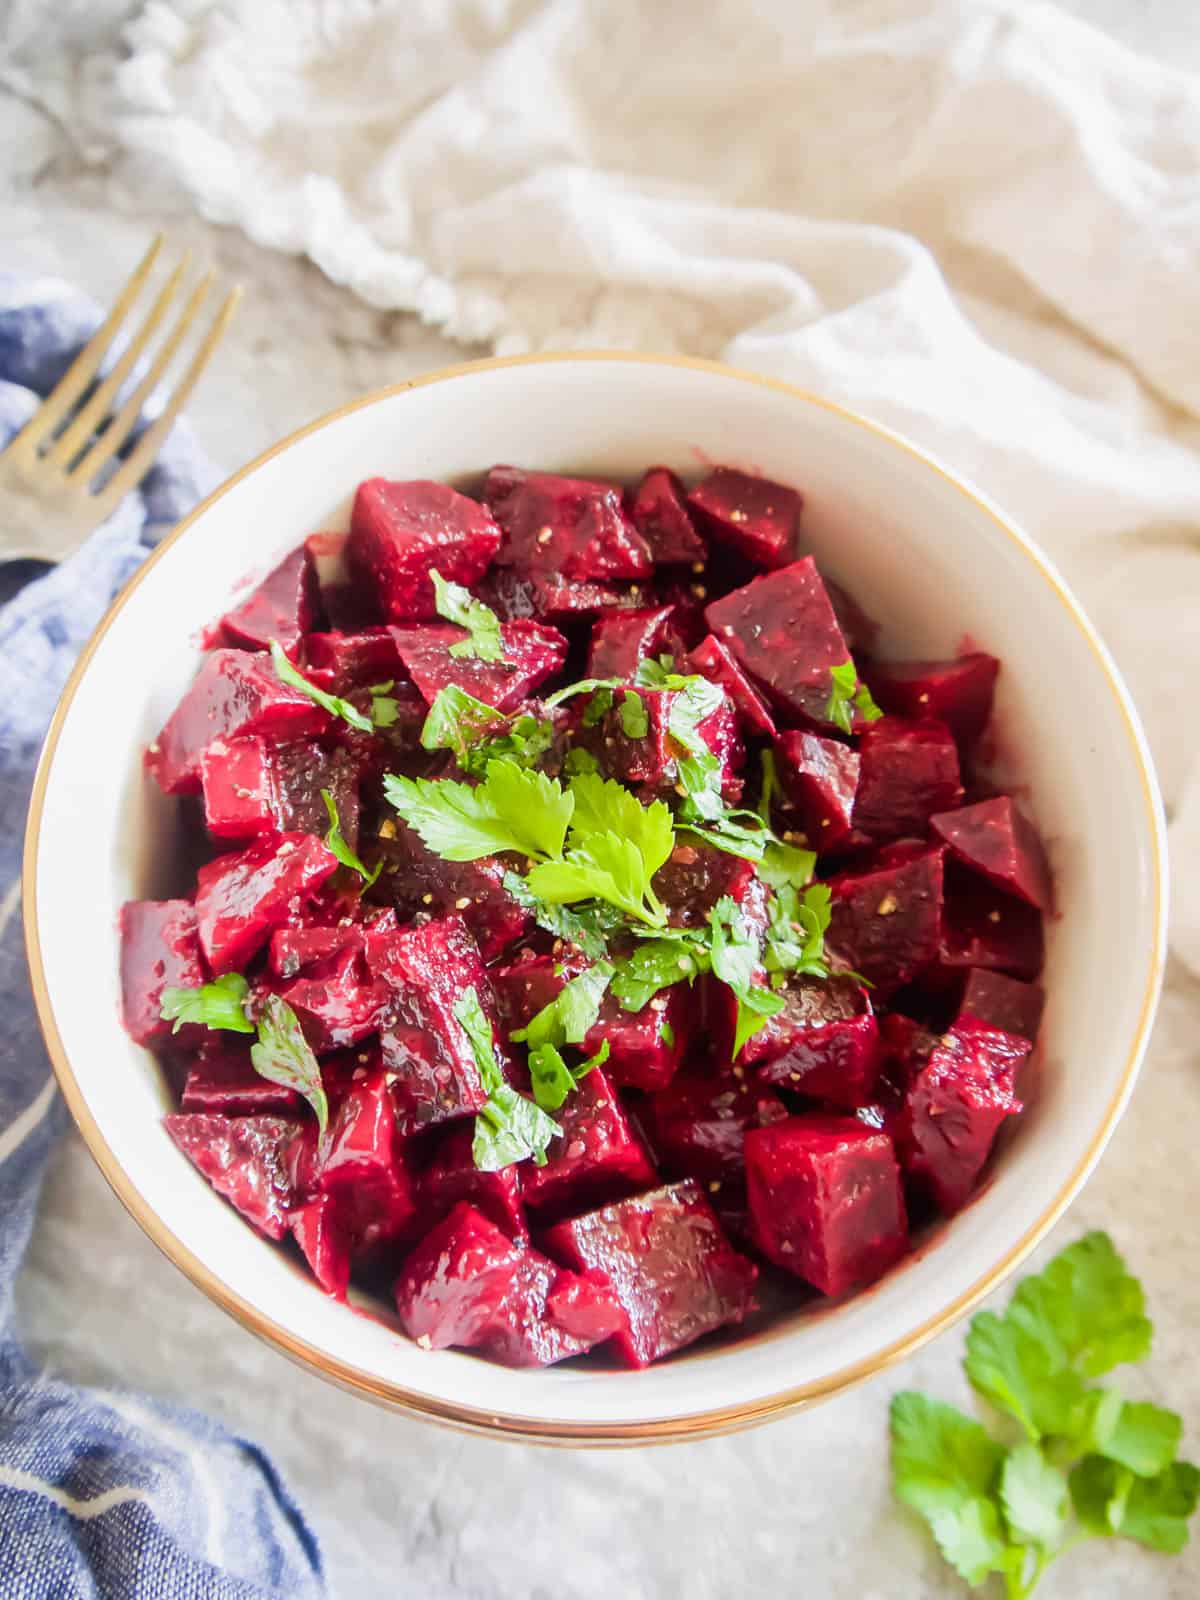 Boiled beet salad in a bowl with a fork on the side.